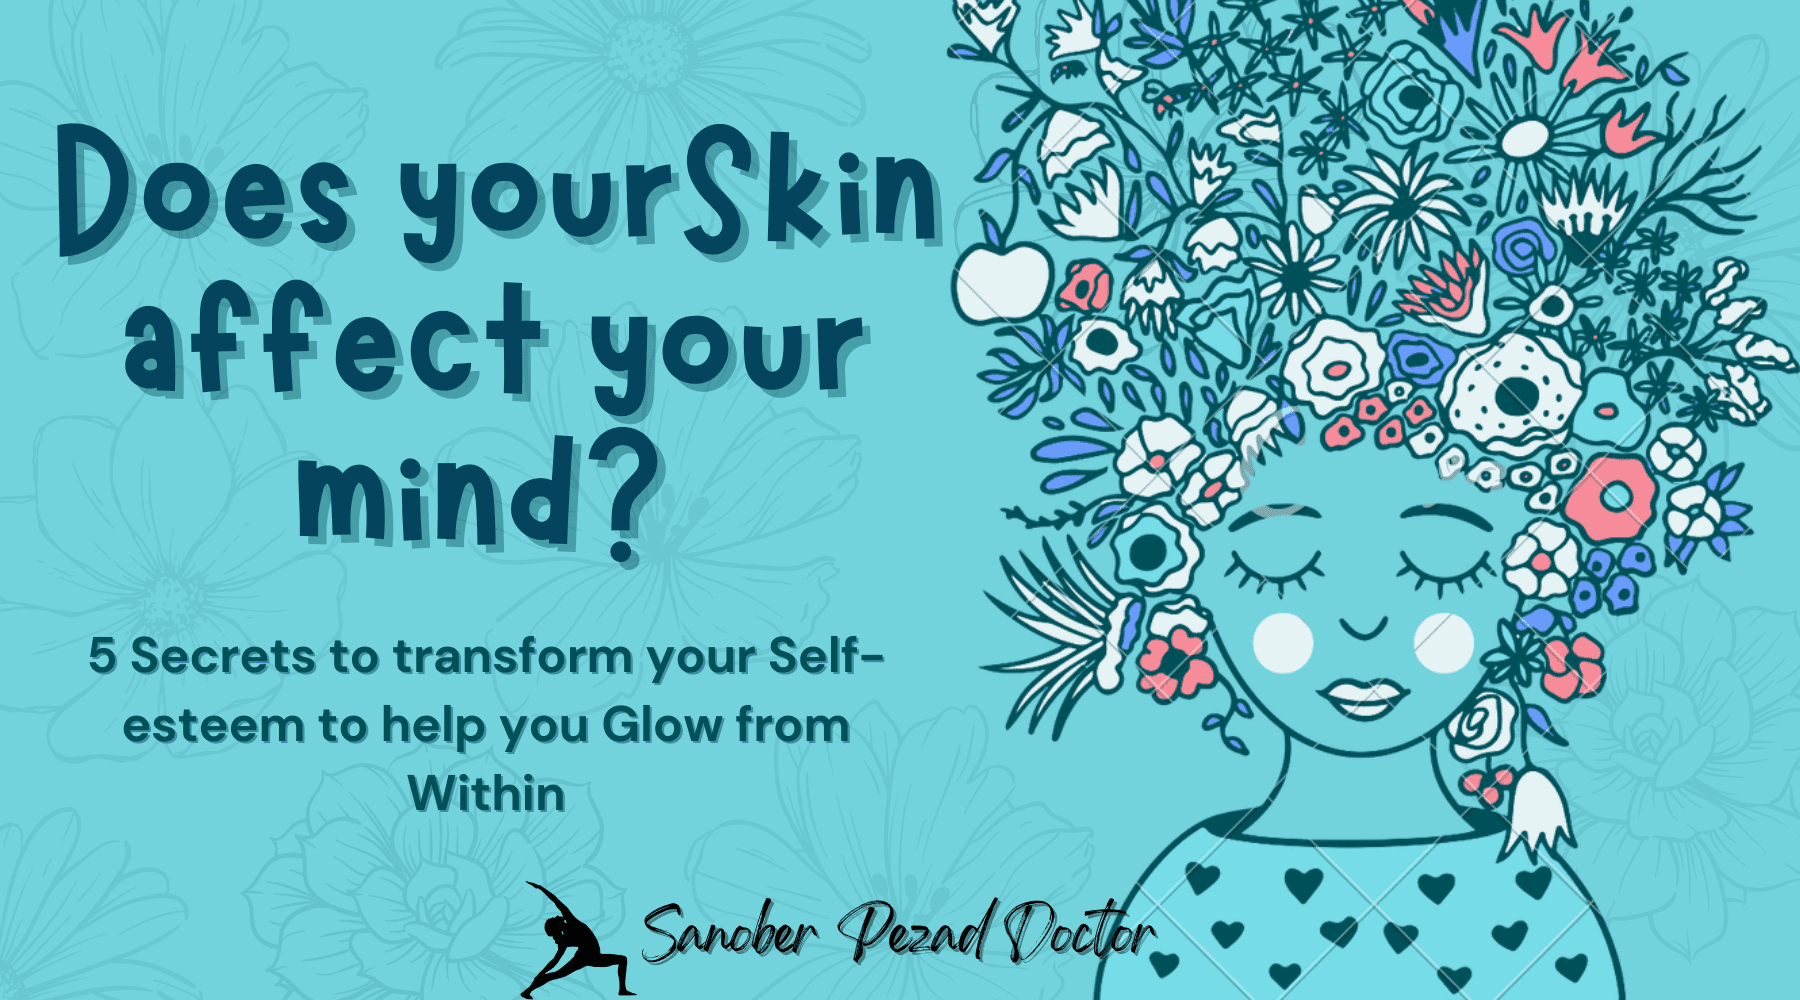 Does your Skin reflect your Mind? You’ll be surprised to learn these secrets from a Holistic Dermatologist!